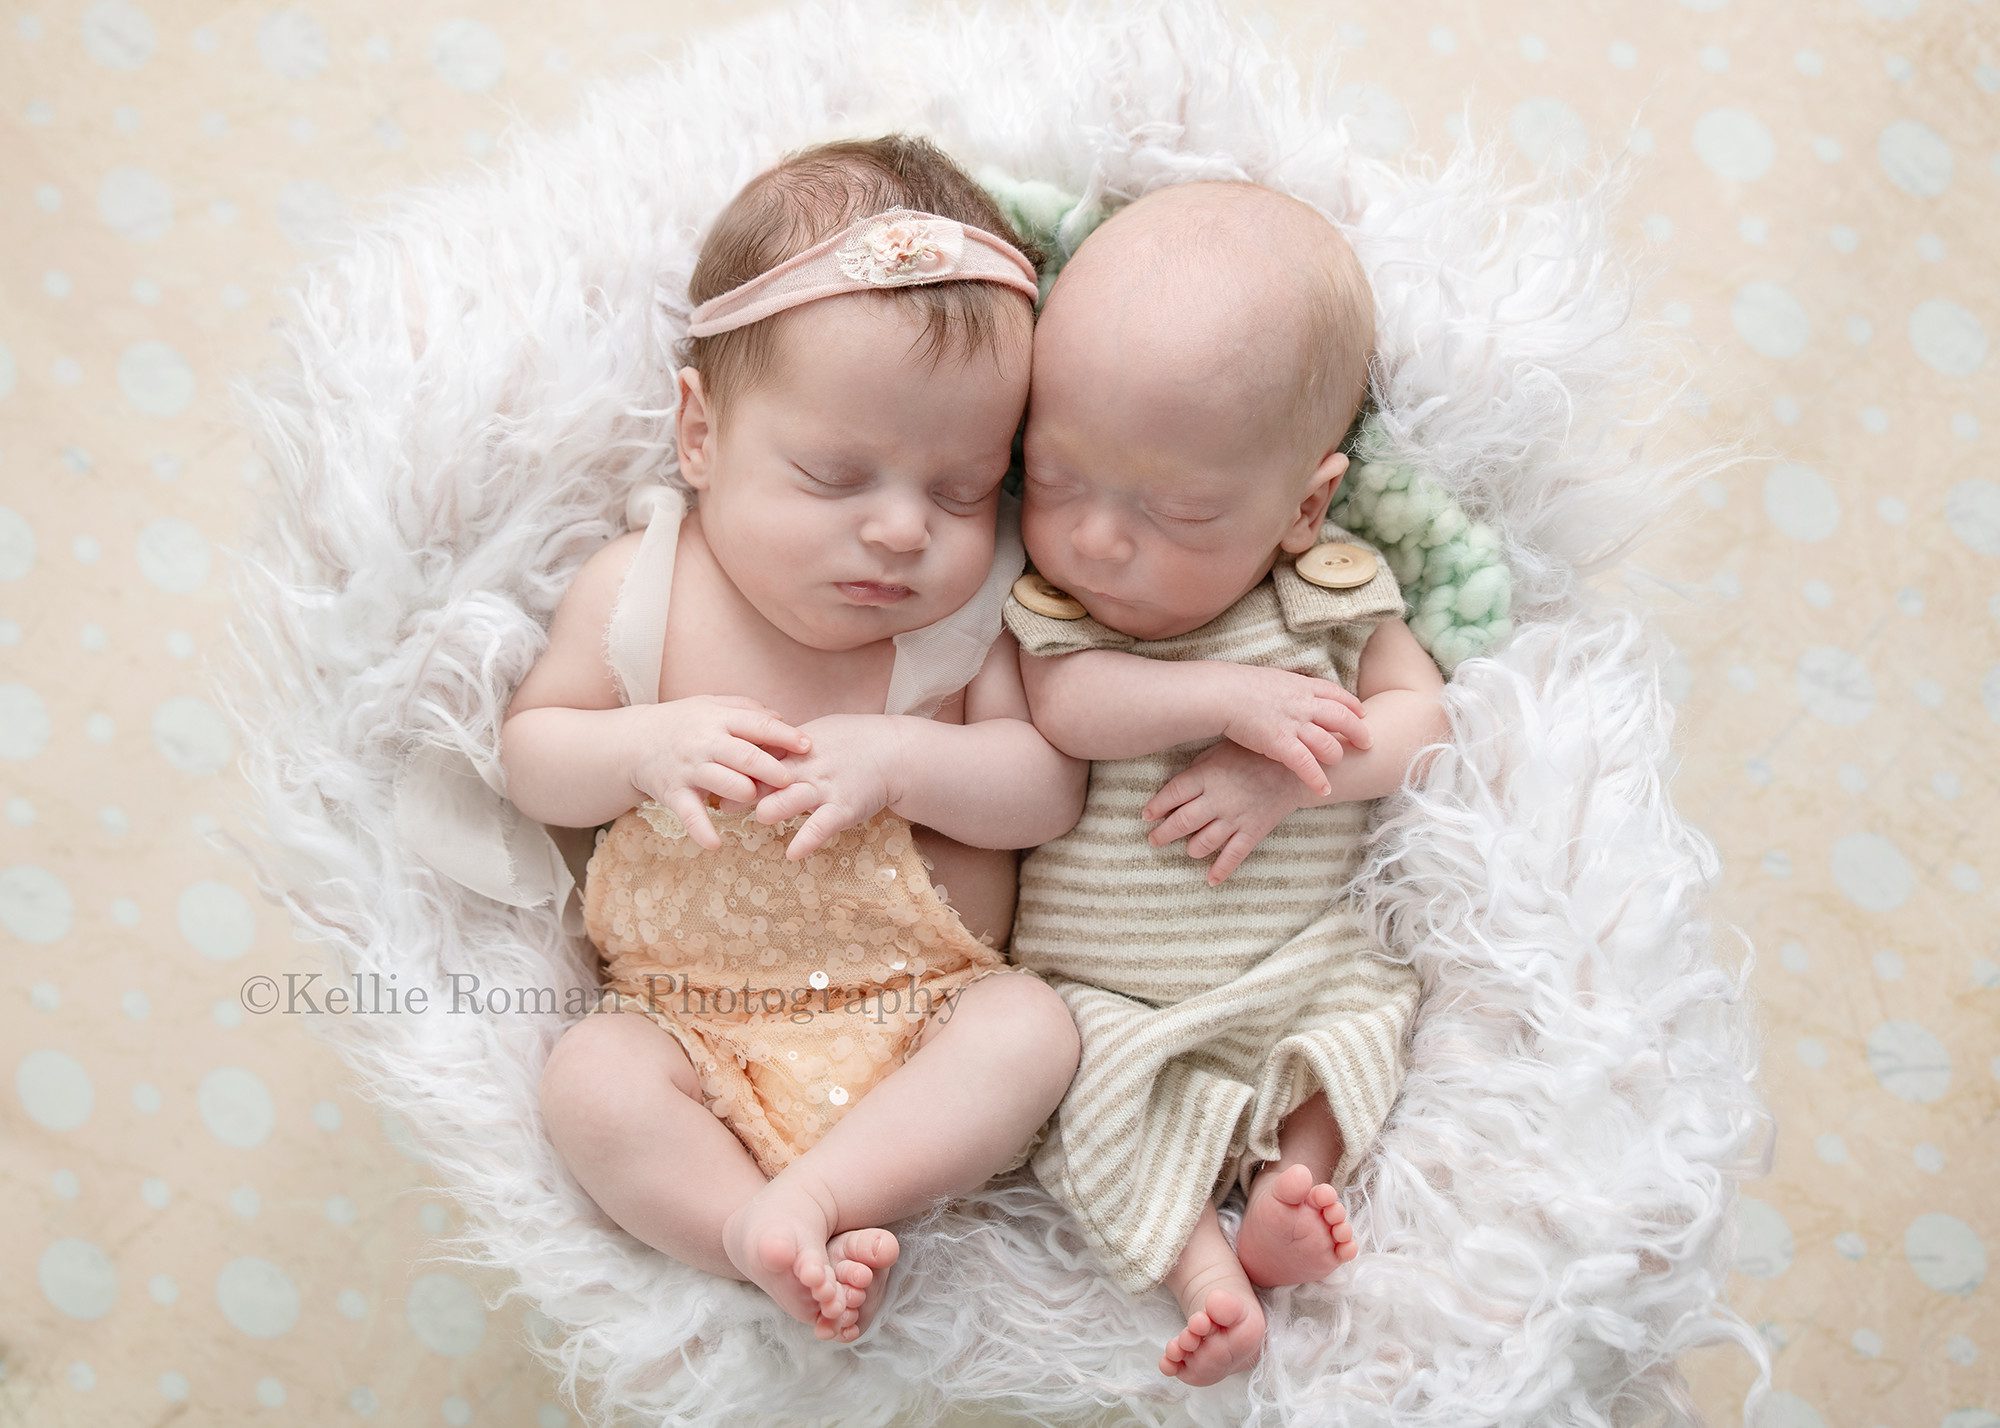 milwaukee twins a newborn brother and sister is posed laying on their backs in a bucket with white fur the boy is wearing a beige striped onesie with buttons and the girl in a peach sequin romper and pink flower headband they are both sleeping with their hands resting on their chests the bucket is on top of a peach polka dot backdrop